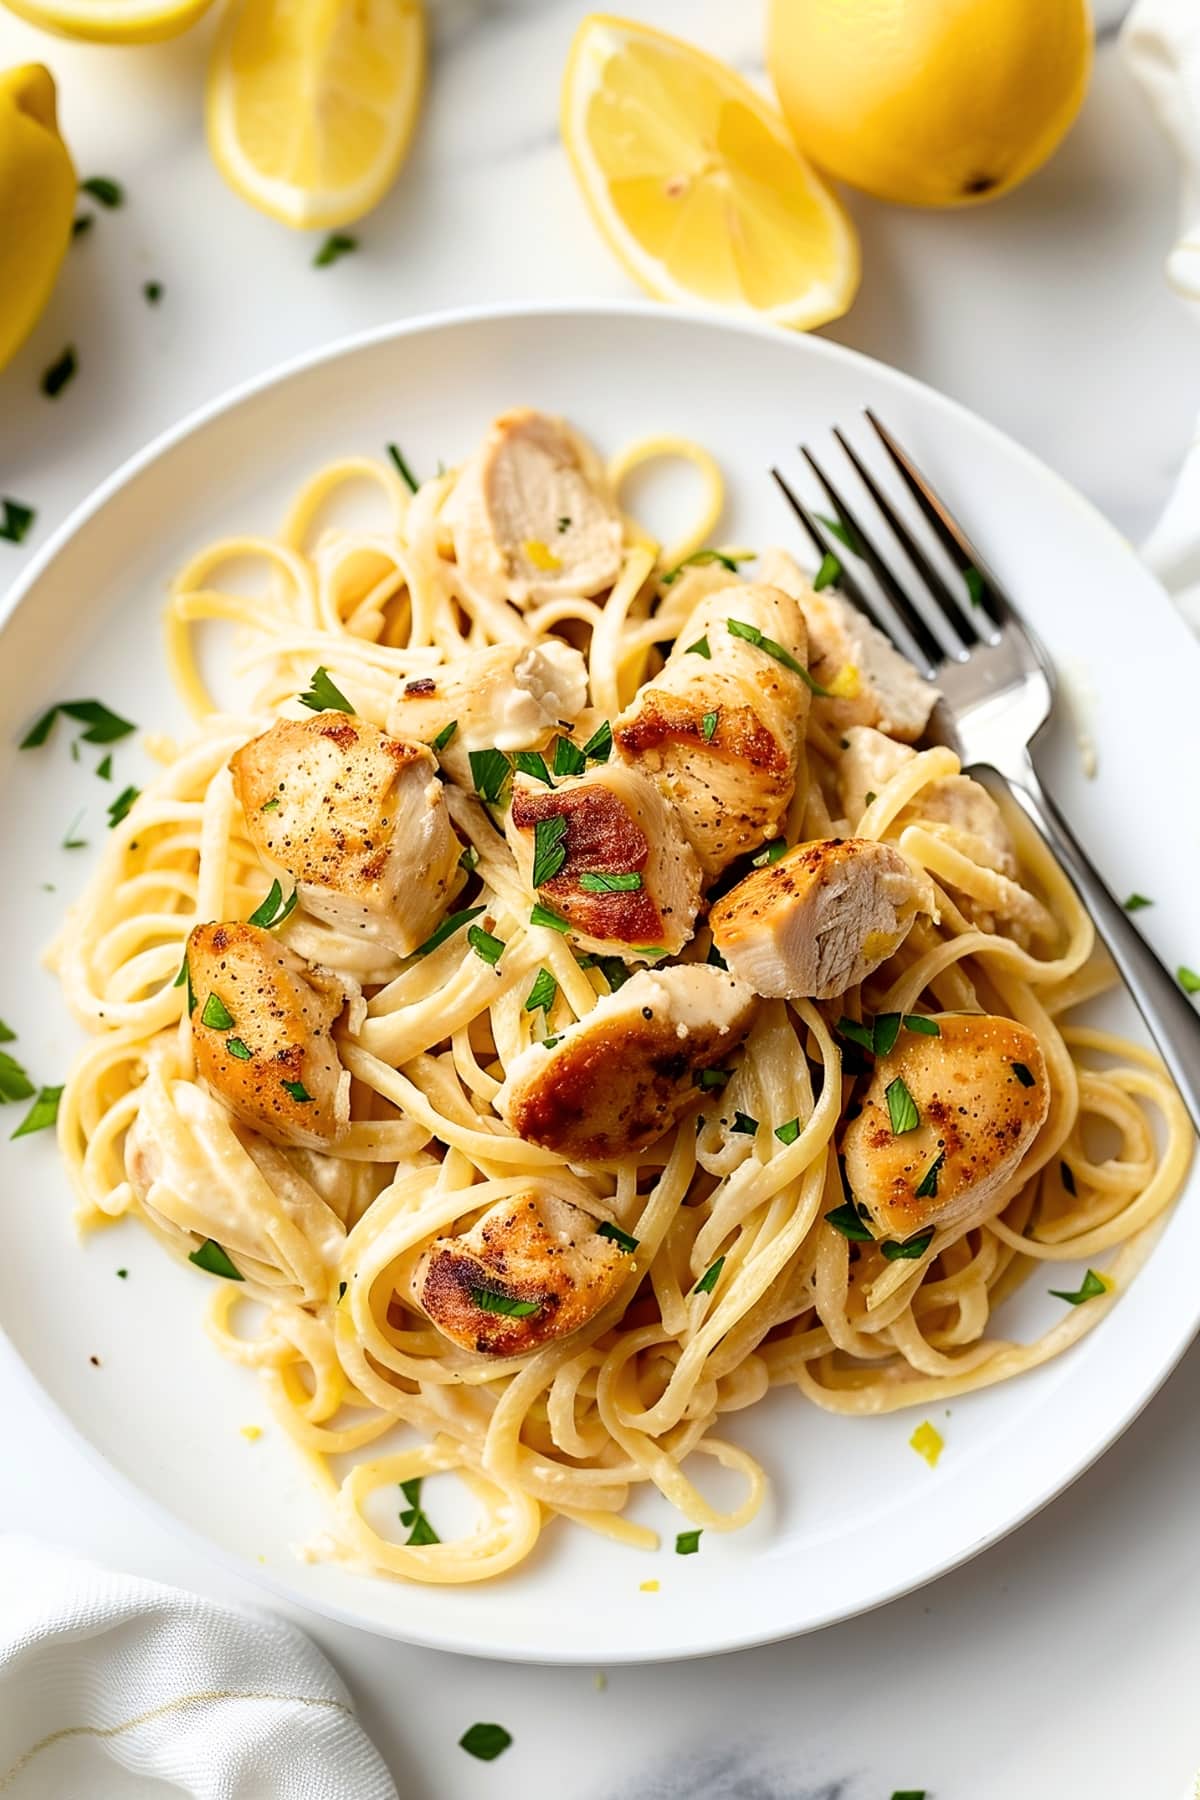 Delicious homemade lemon chicken pasta in a white plate